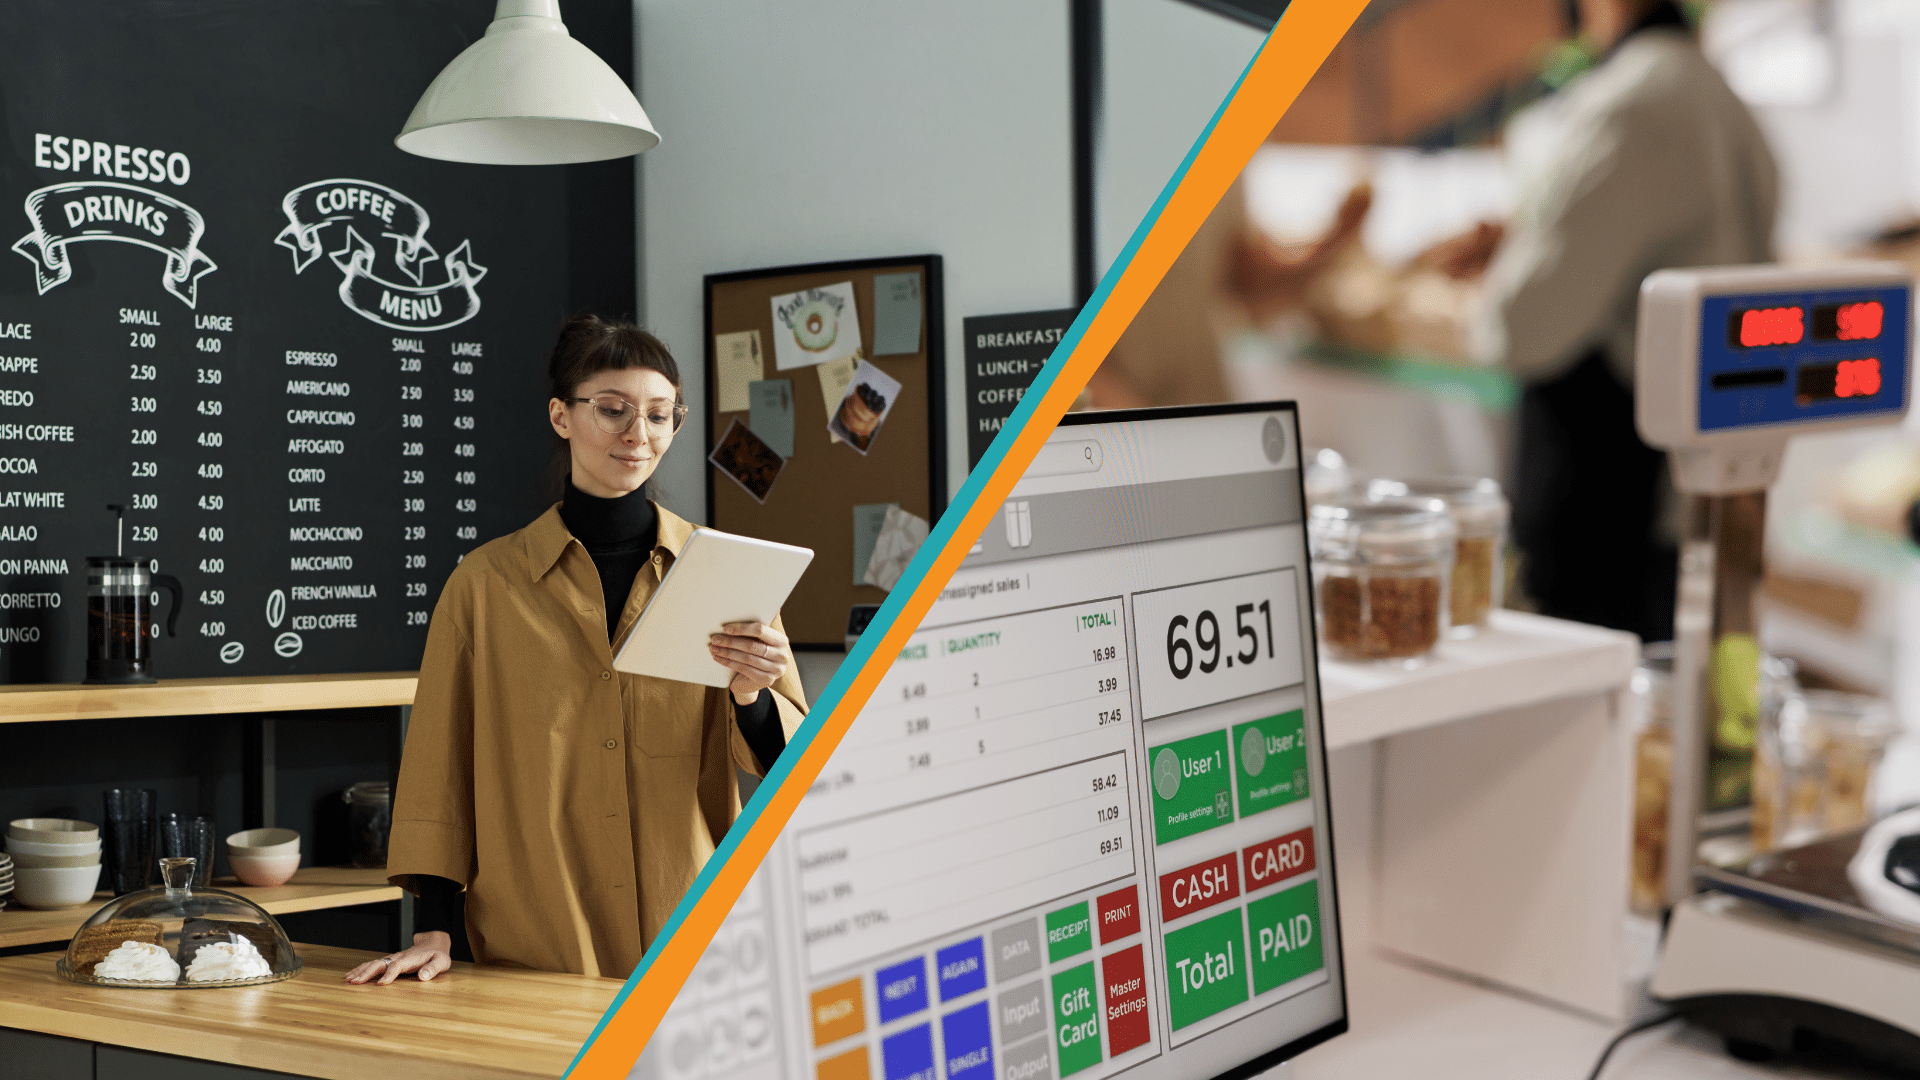 retail price optimization software featured image showing a coffee shop manager on one side and a grocery store scale and point of sale display screen on the other